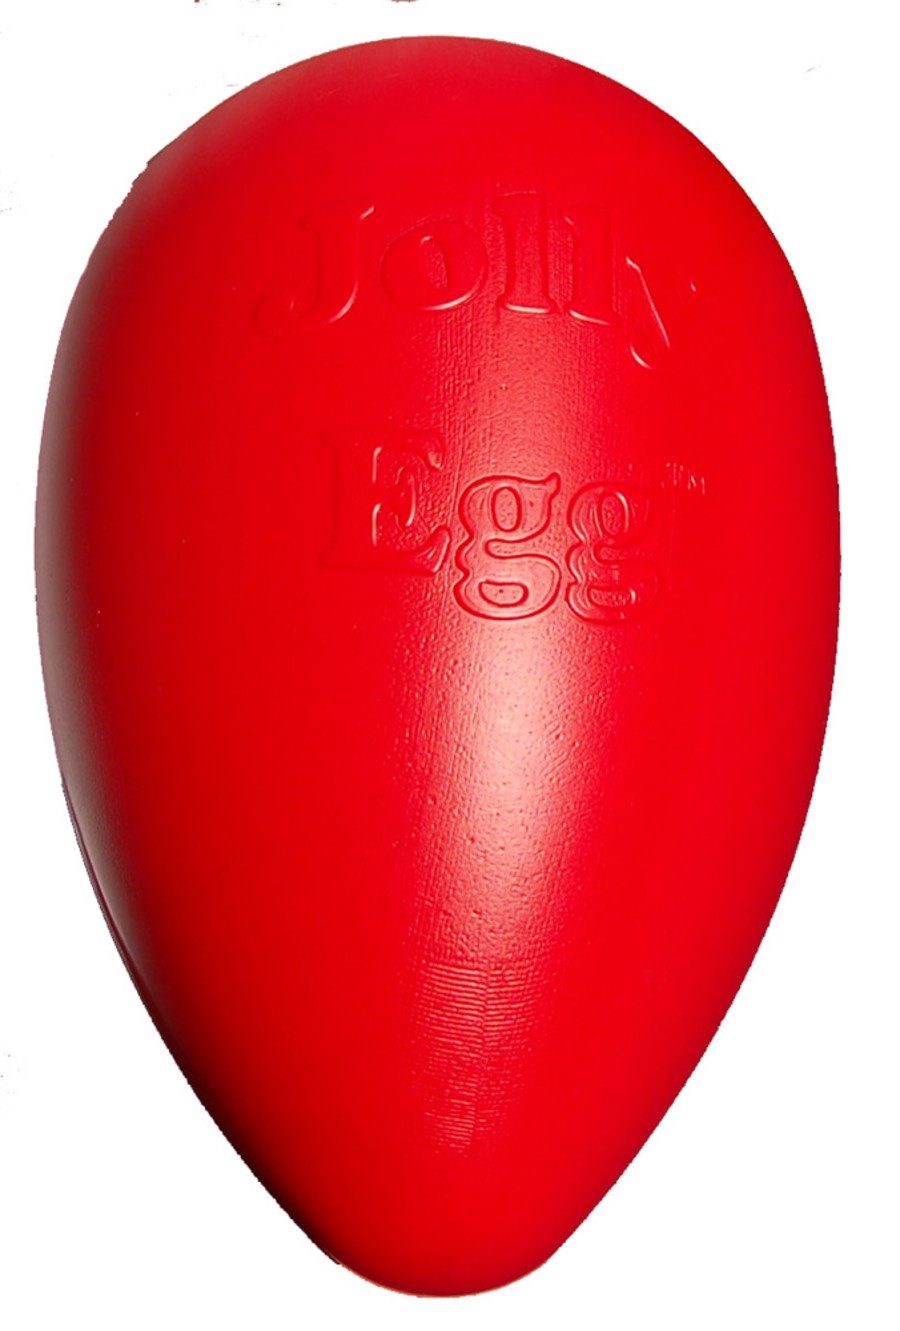 Jolly Pet Egg Hard Plastic Dog Toy Red, SM, 8 in, Jolly Pet